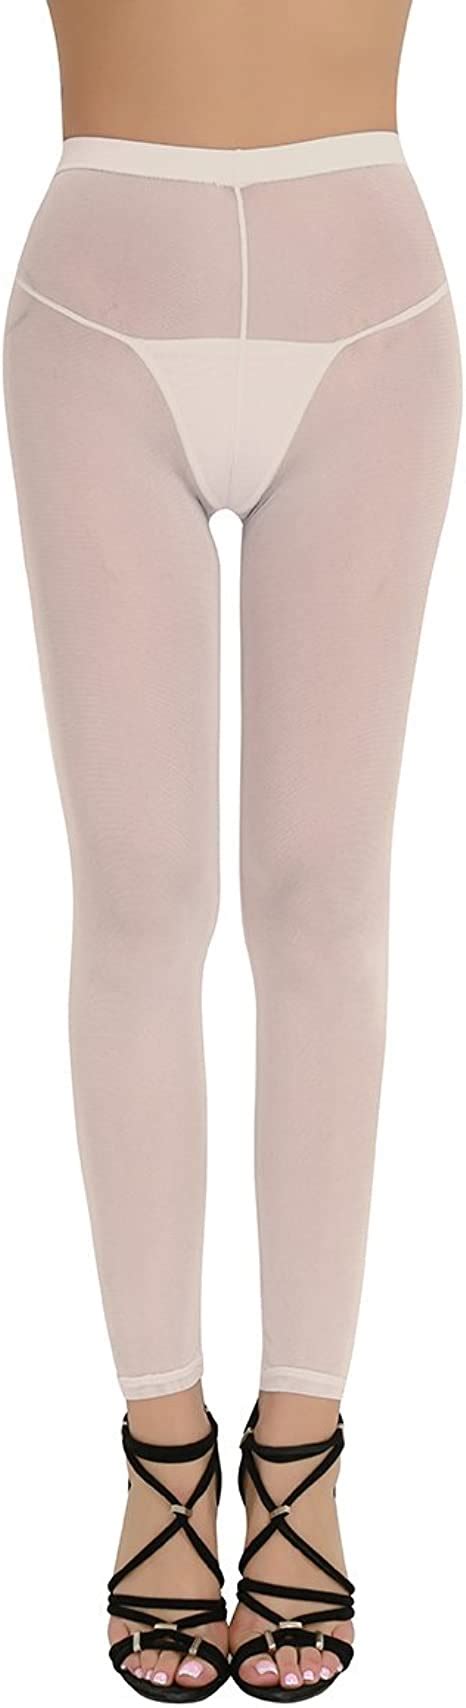 Acsuss Womens Semi Opaque Tights Sheer Footless Pantyhose Seamless Leggings At Amazon Womens